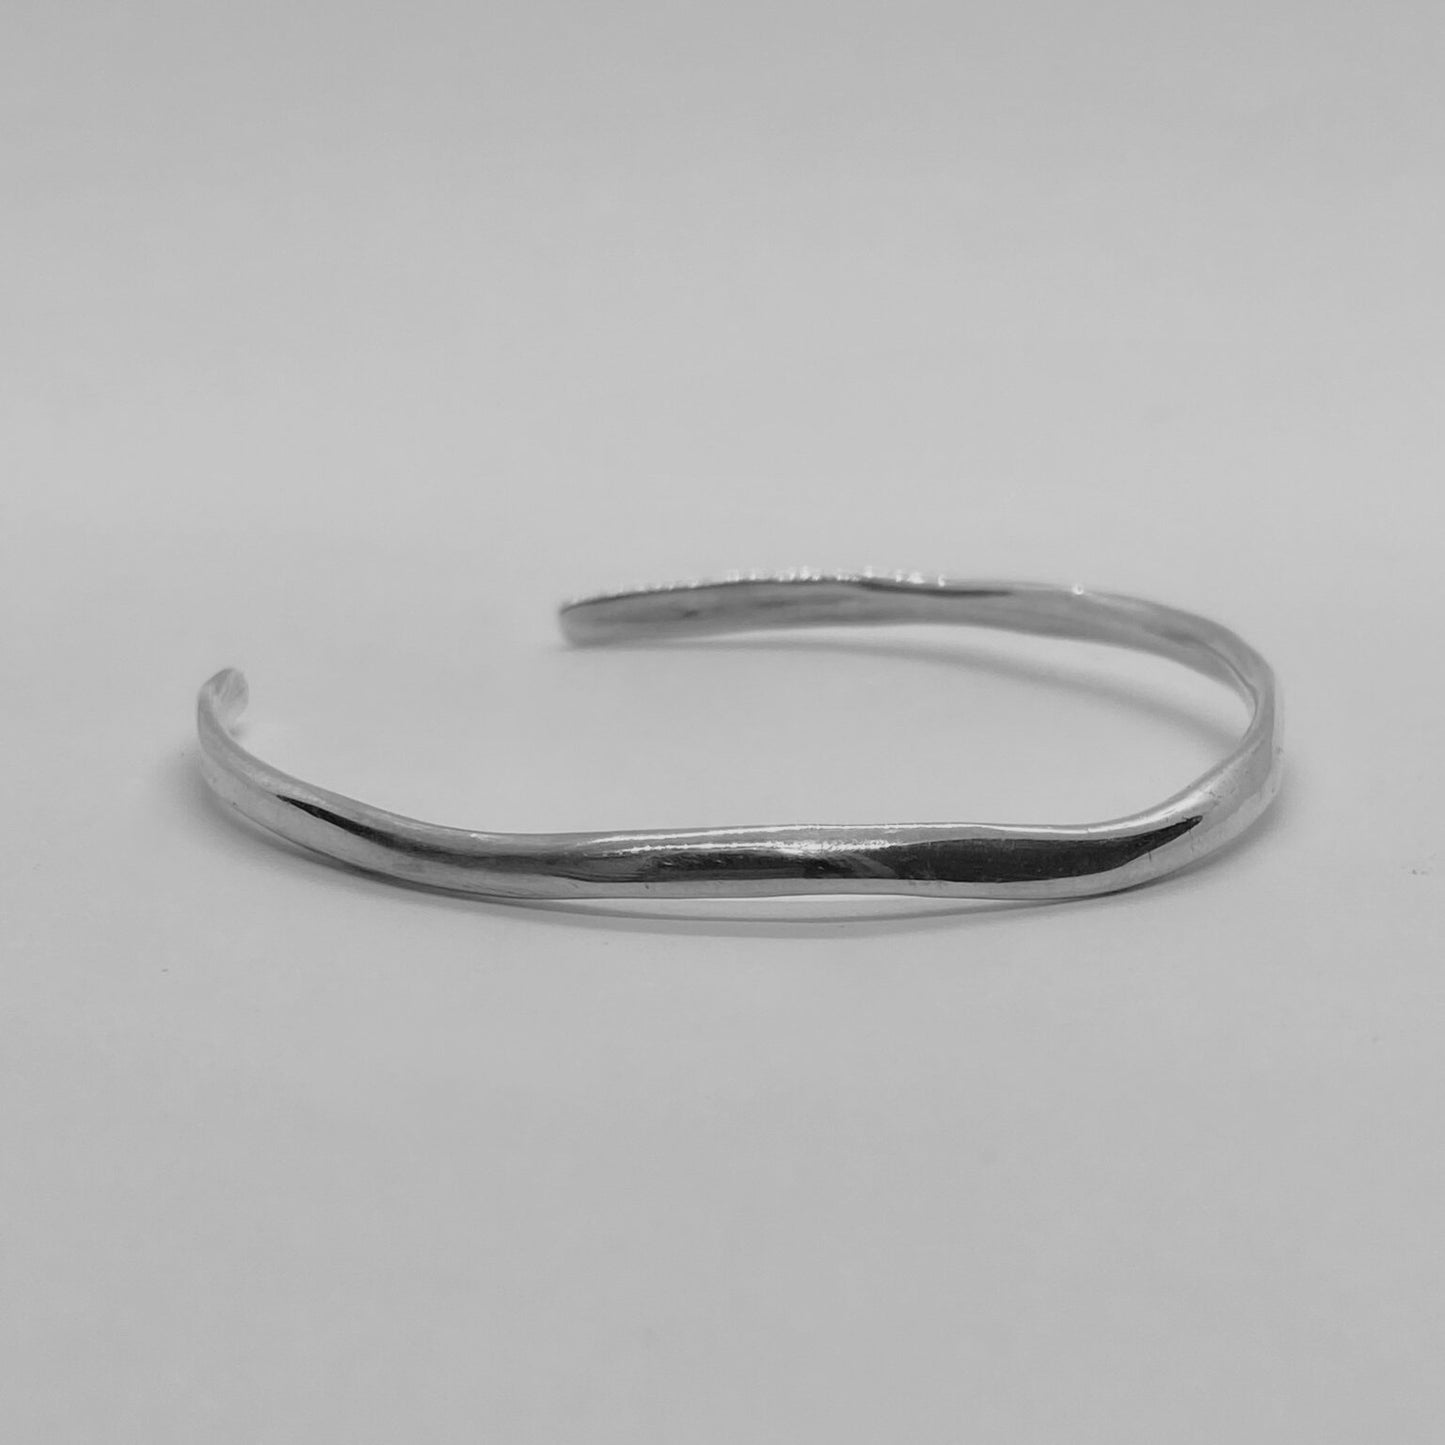 The Branch bracelet is a handmade creation crafted from sterling silver 925, featuring an exquisite and delicate minimal design. It gently fits low on the wrist, providing a smooth and glossy sensation.